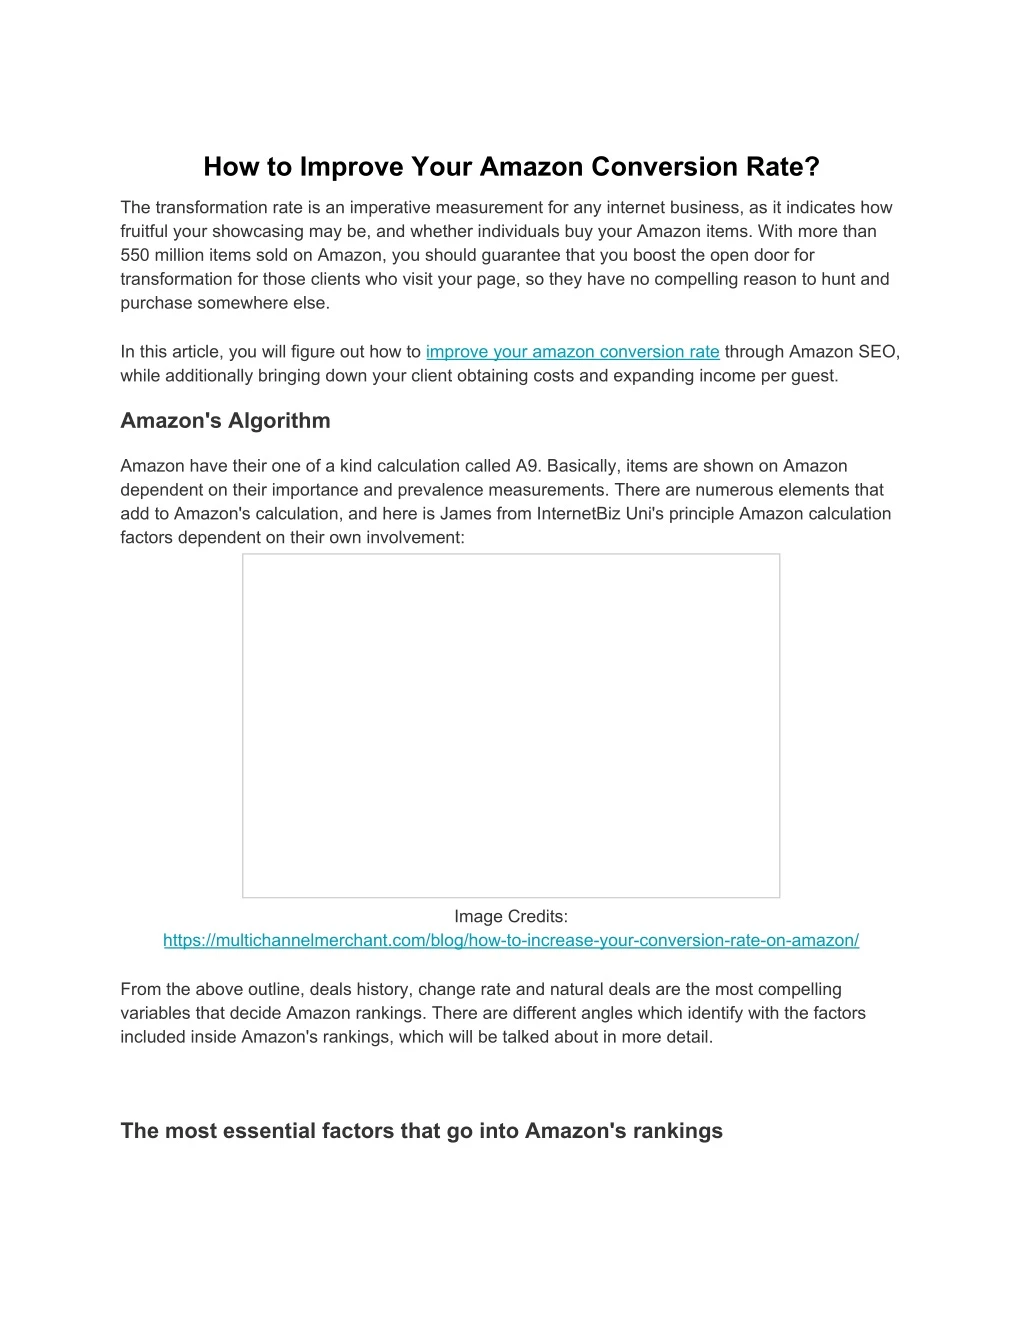 how to improve your amazon conversion rate